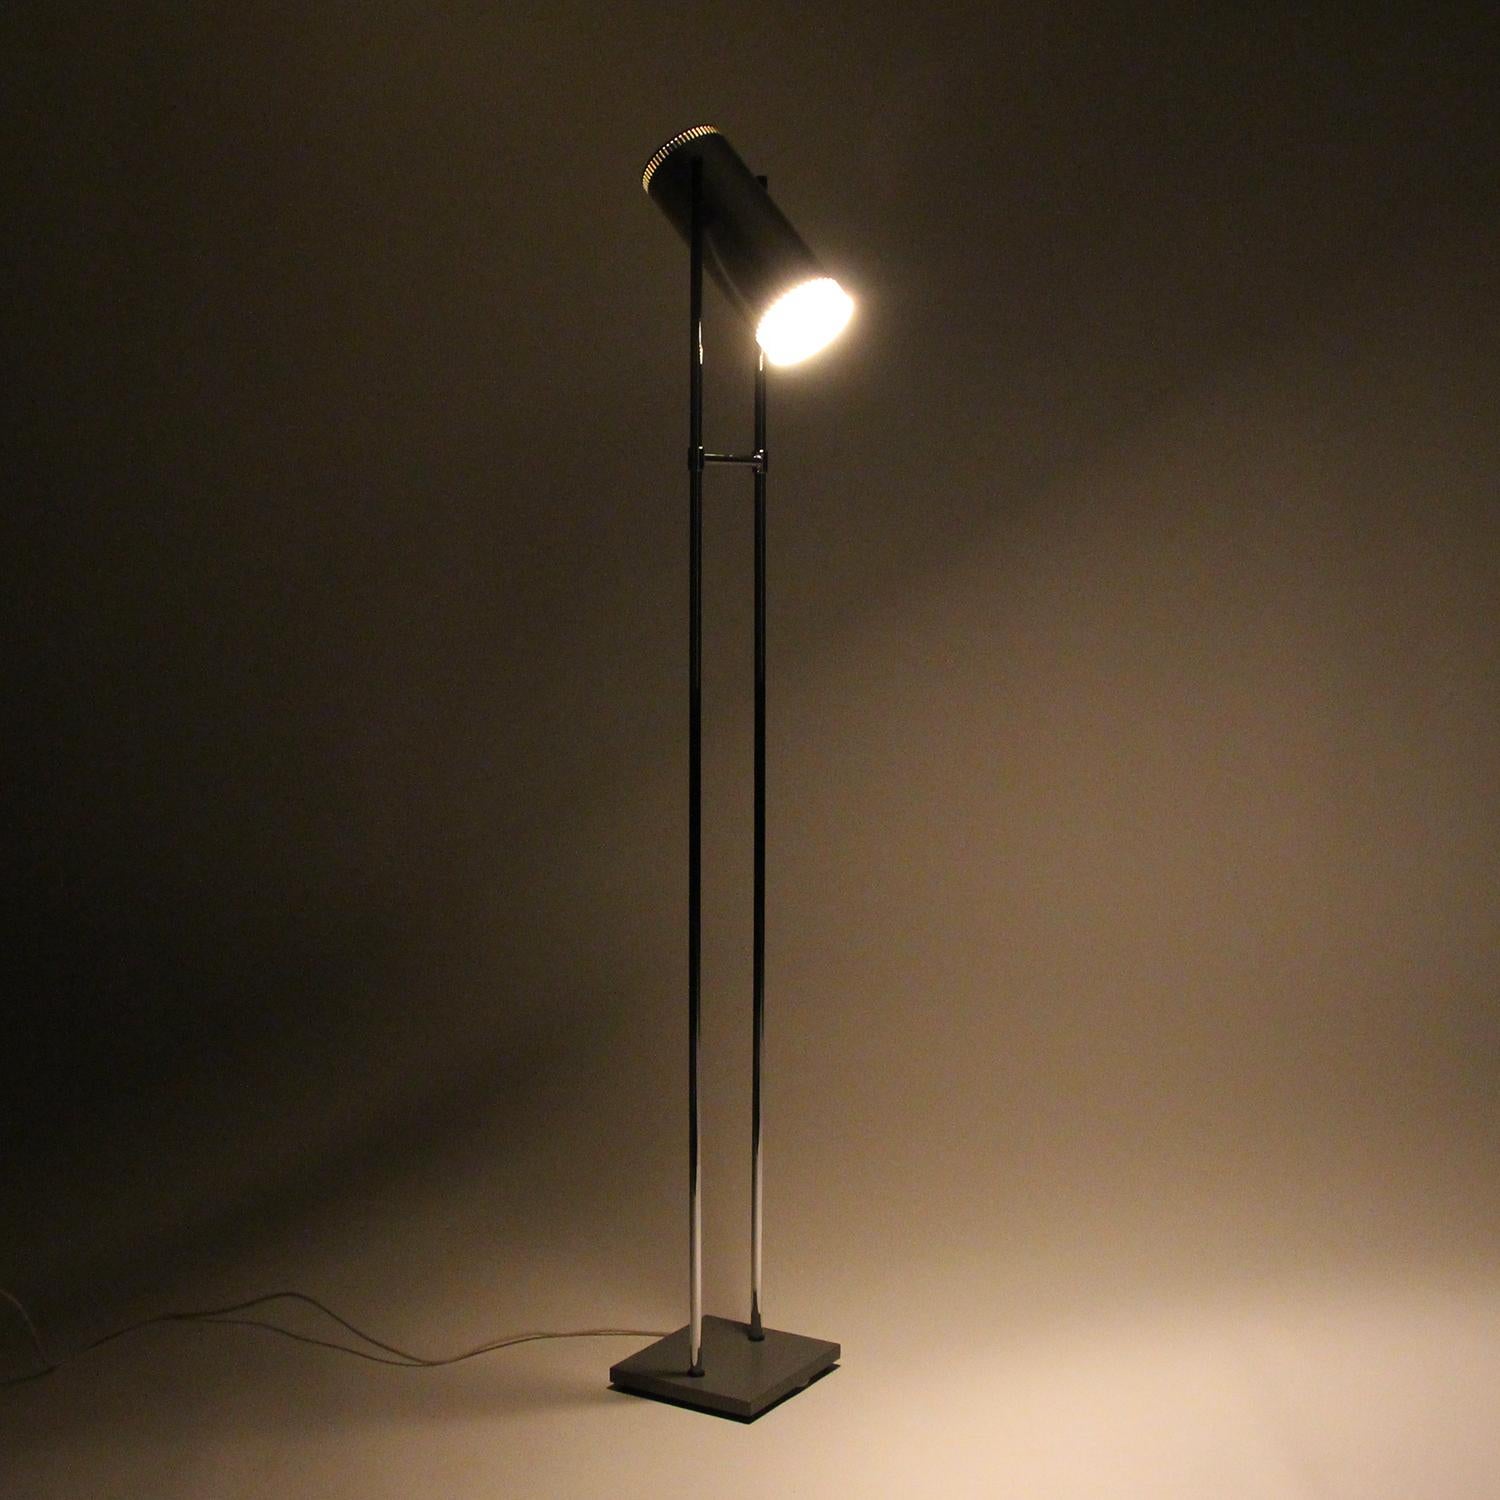 Trombone II, aluminum floor lamp by Jo Hammerborg for Fog & Mørup in 1966 - a beautiful Danish midcentury floor lamp in very good vintage condition.

A sleek shaped floor lamp with a square gray lacquered metal base, from where two aluminum